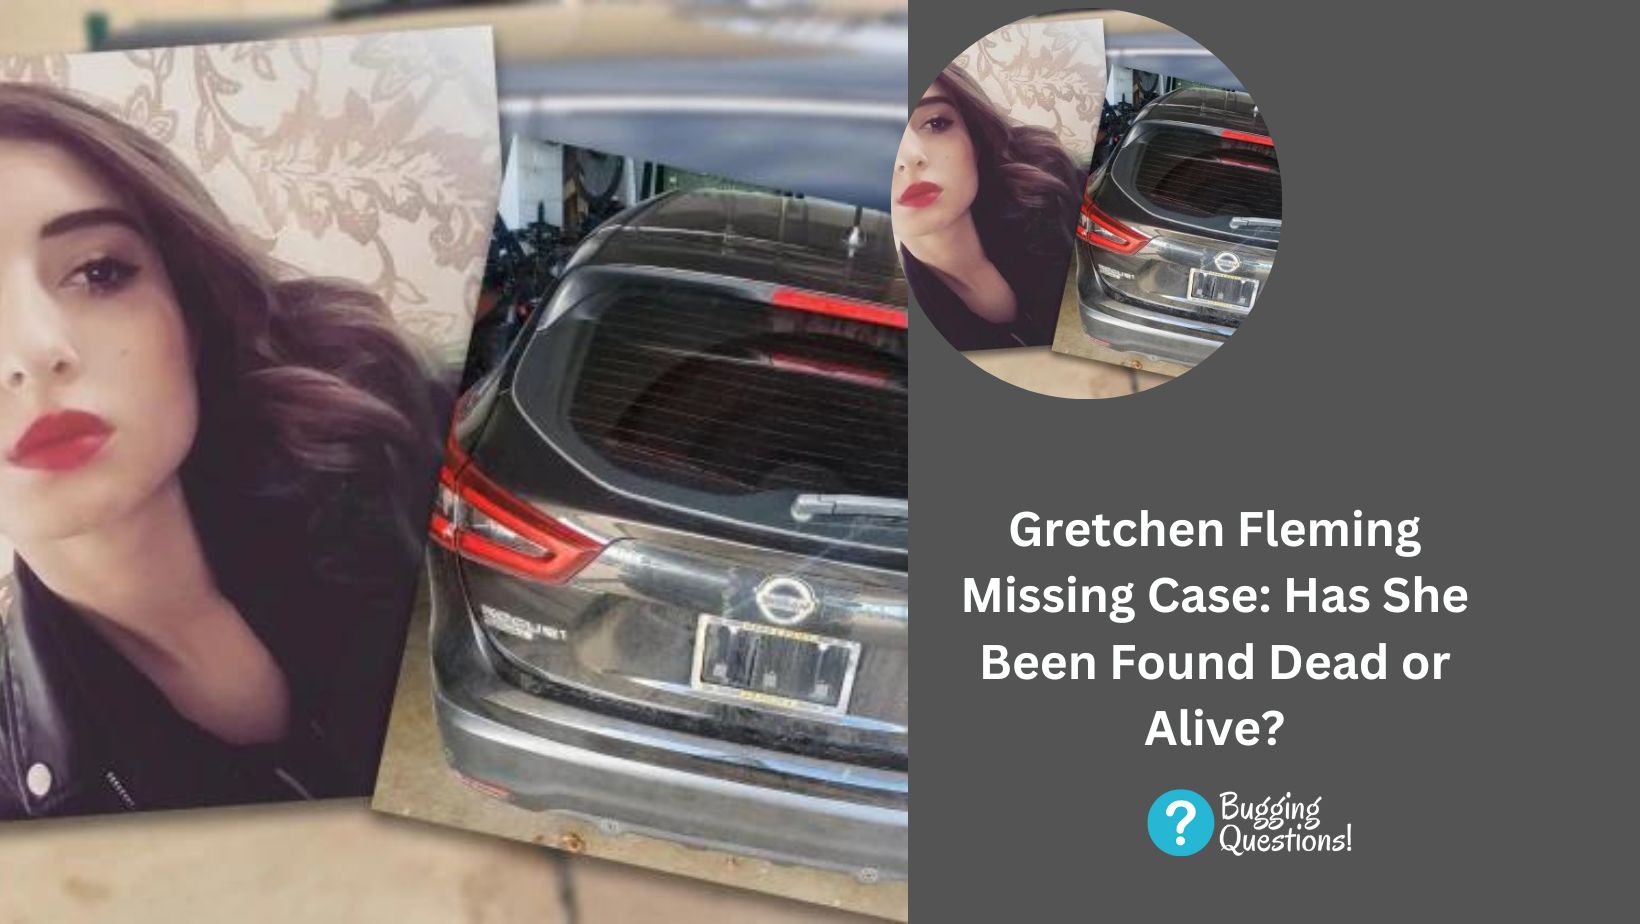 Gretchen Fleming Missing Case: Has She Been Found Dead or Alive?